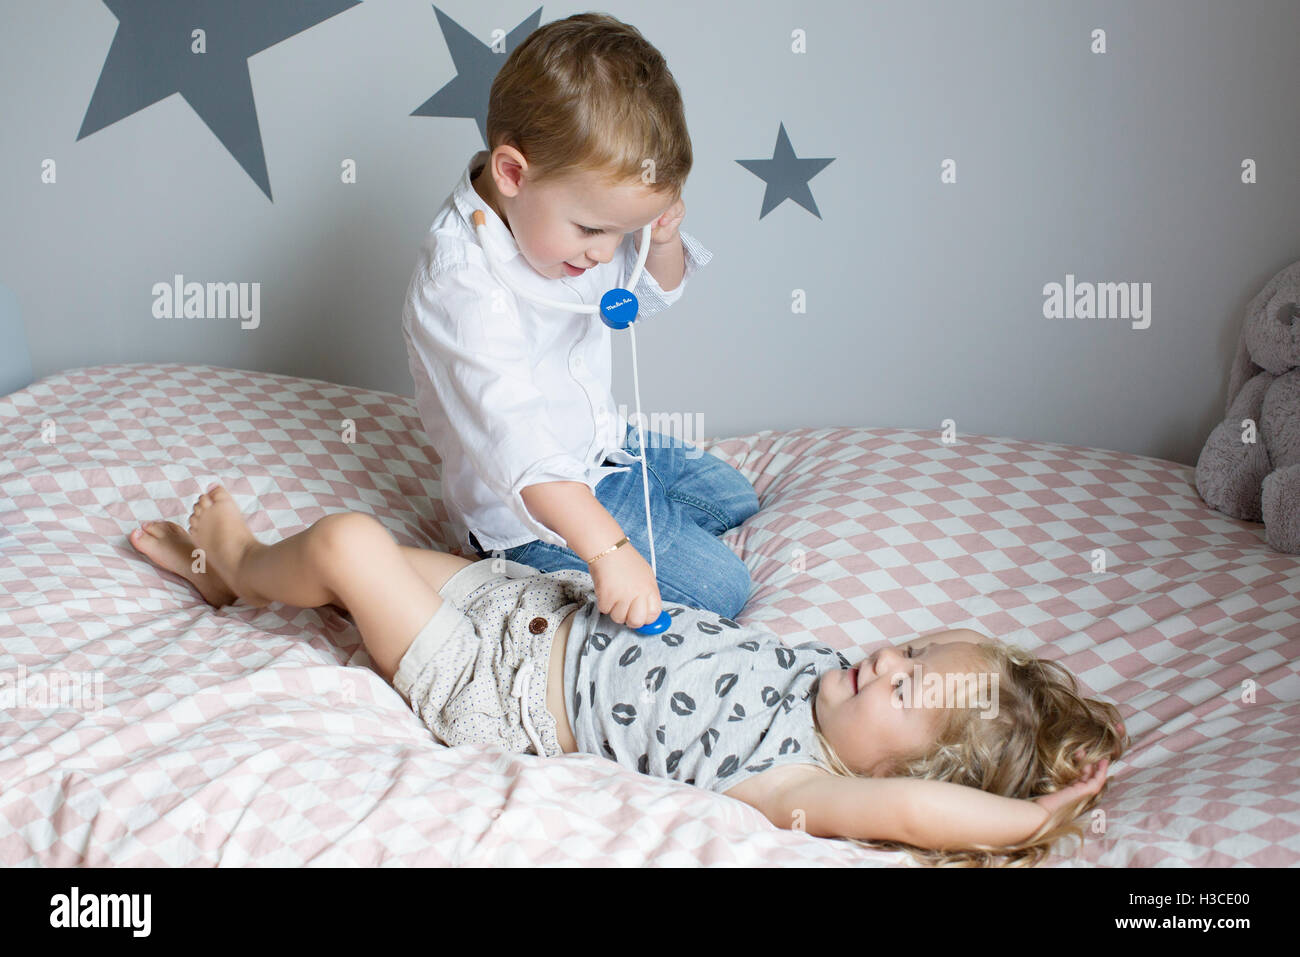 Children playing doctor with toy stethoscope Stock Photo